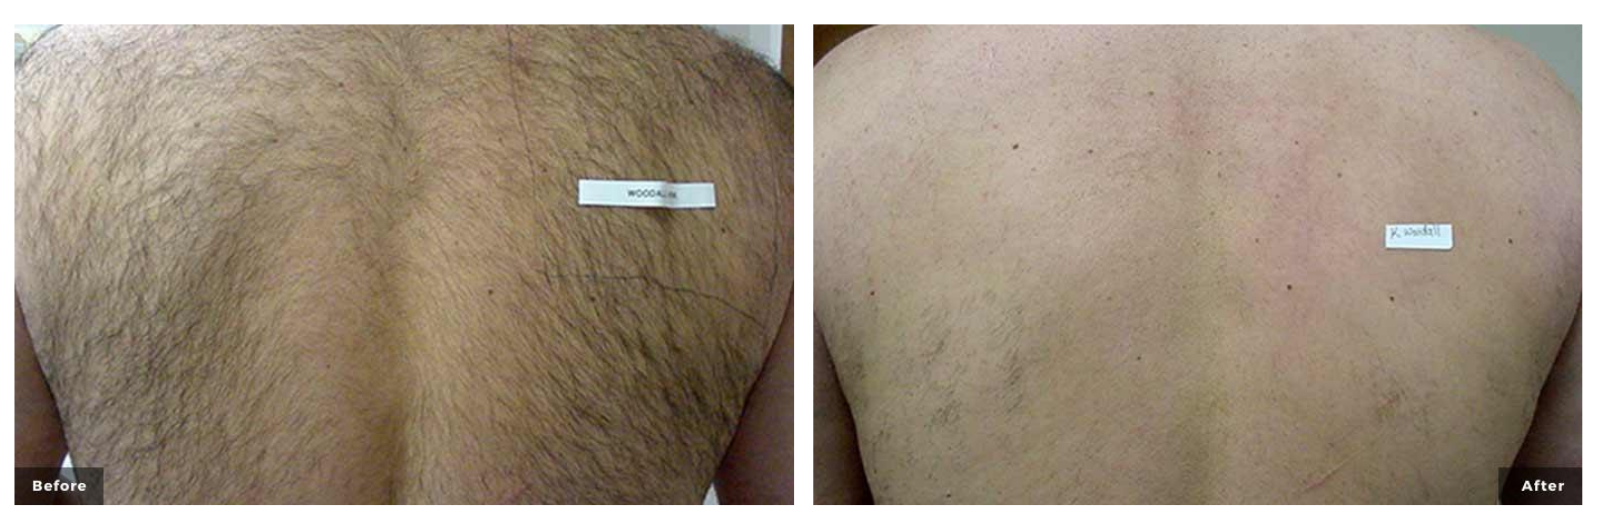 Laser hair removal men's back before and after images